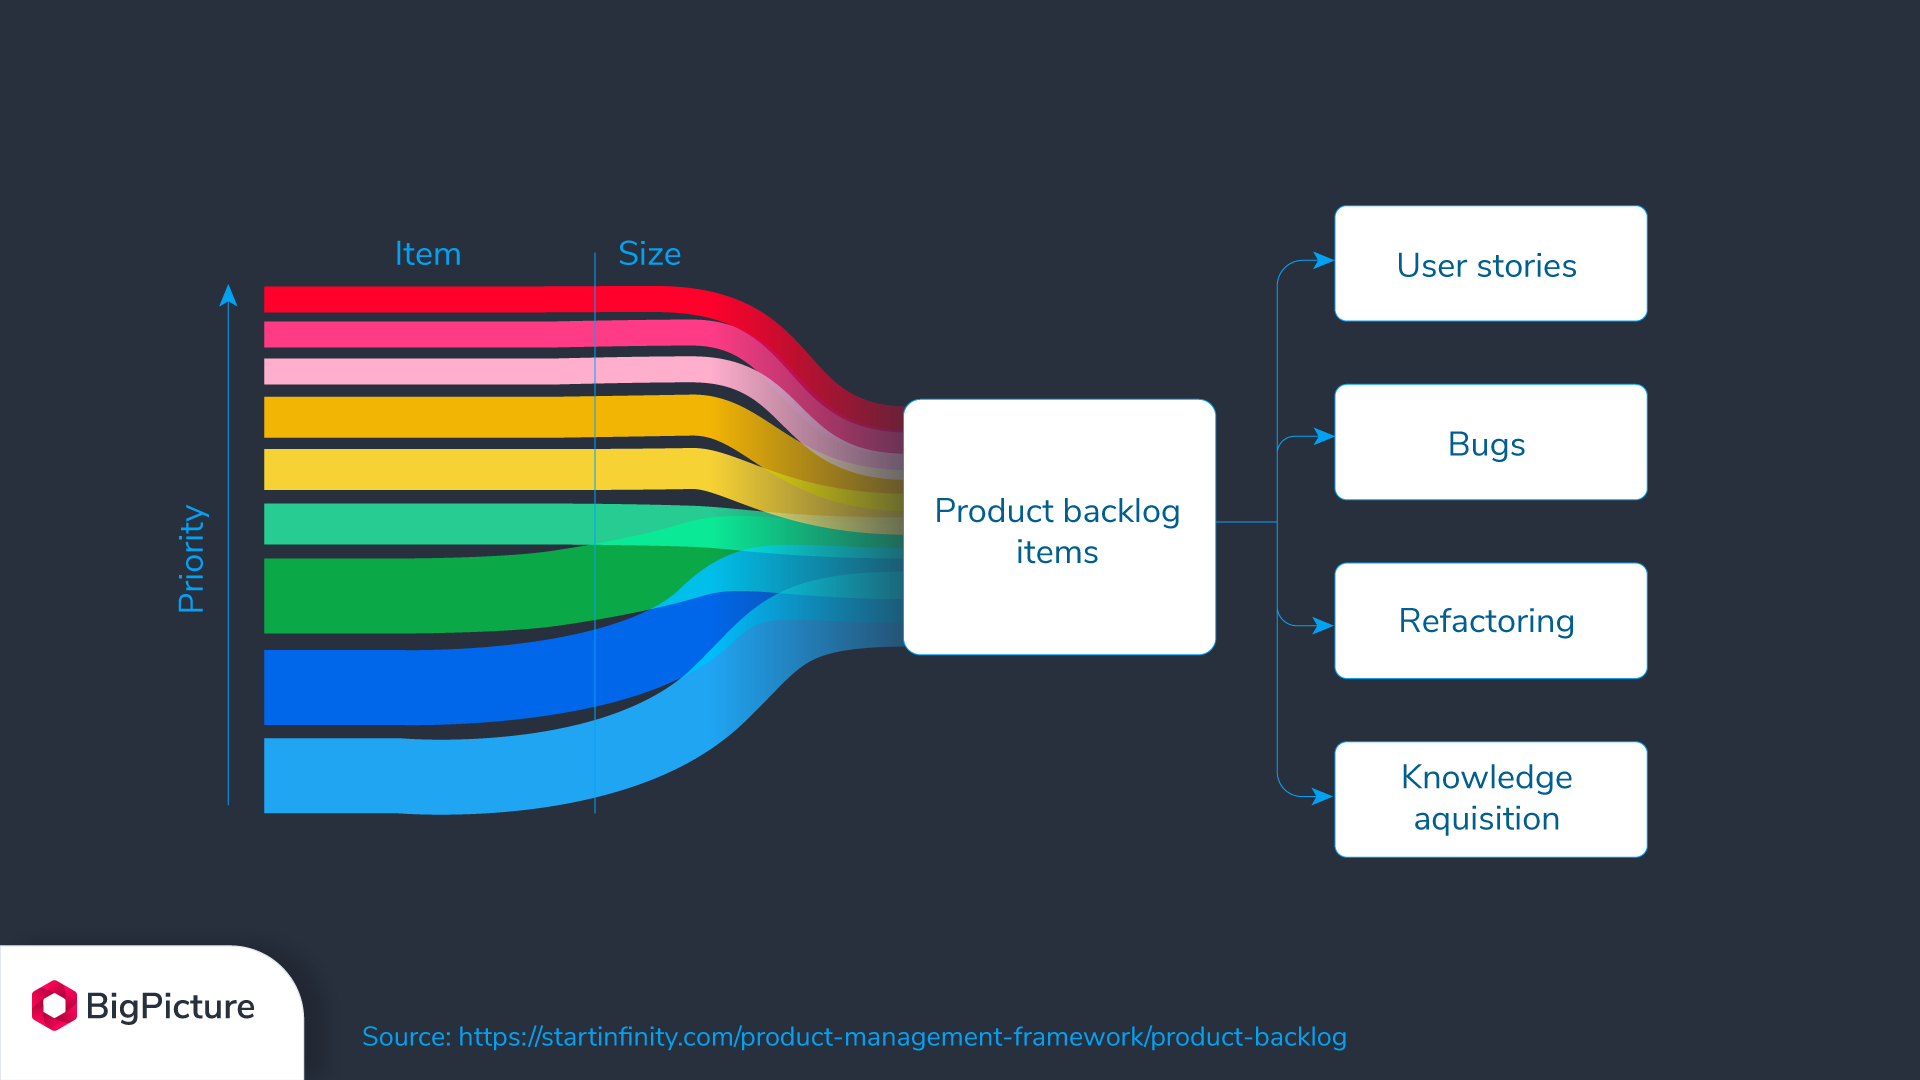 A visualization of the product backlog in Scrum.